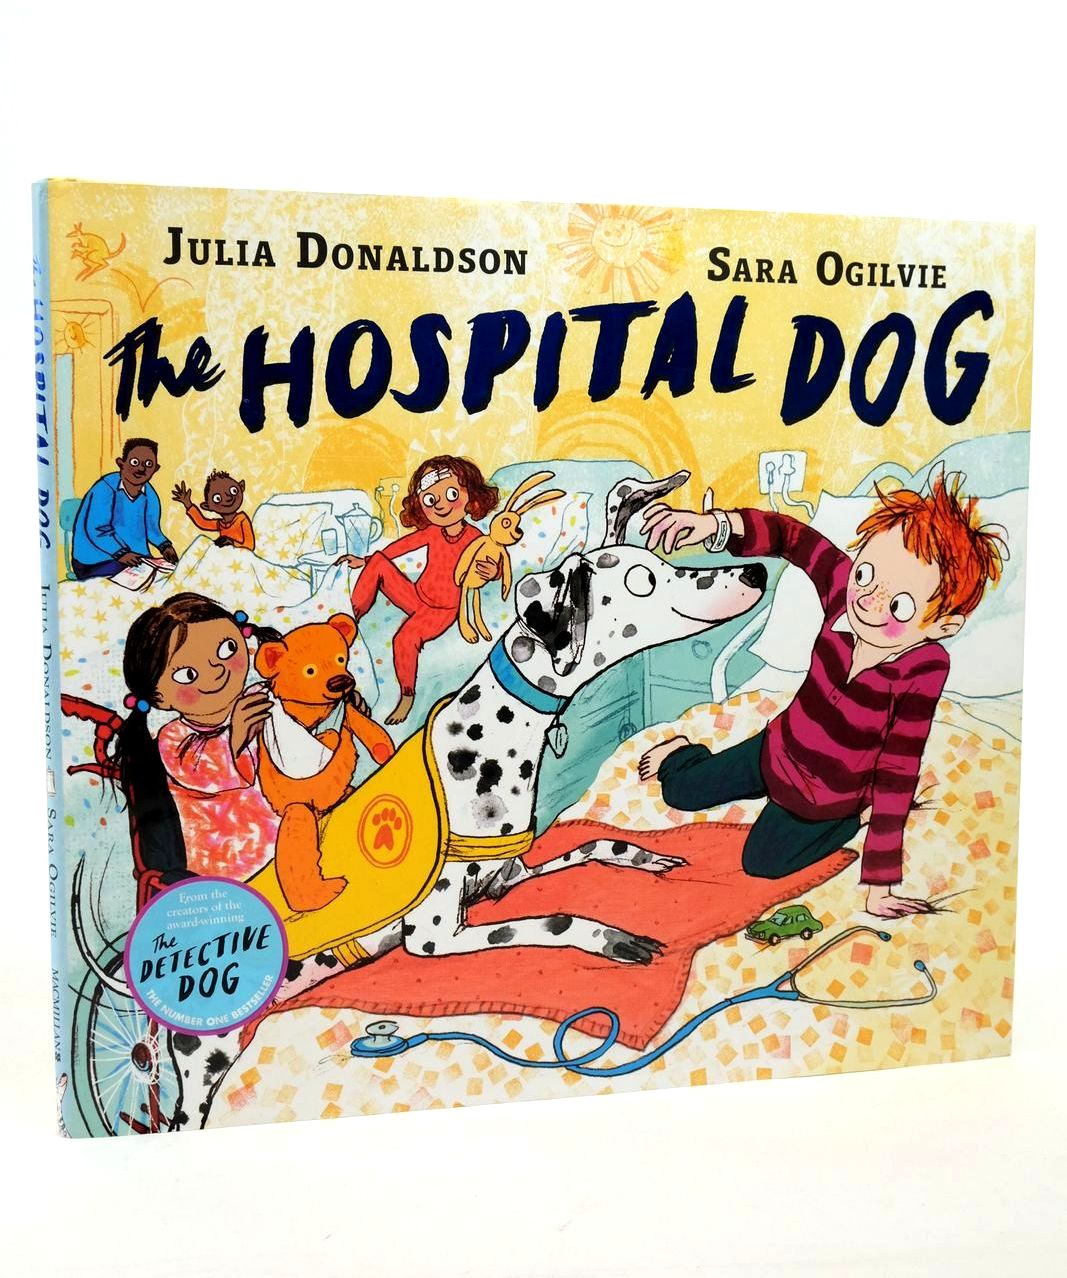 Photo of THE HOSPITAL DOG written by Donaldson, Julia illustrated by Ogilvie, Sara published by Macmillan Children's Books (STOCK CODE: 1322757)  for sale by Stella & Rose's Books